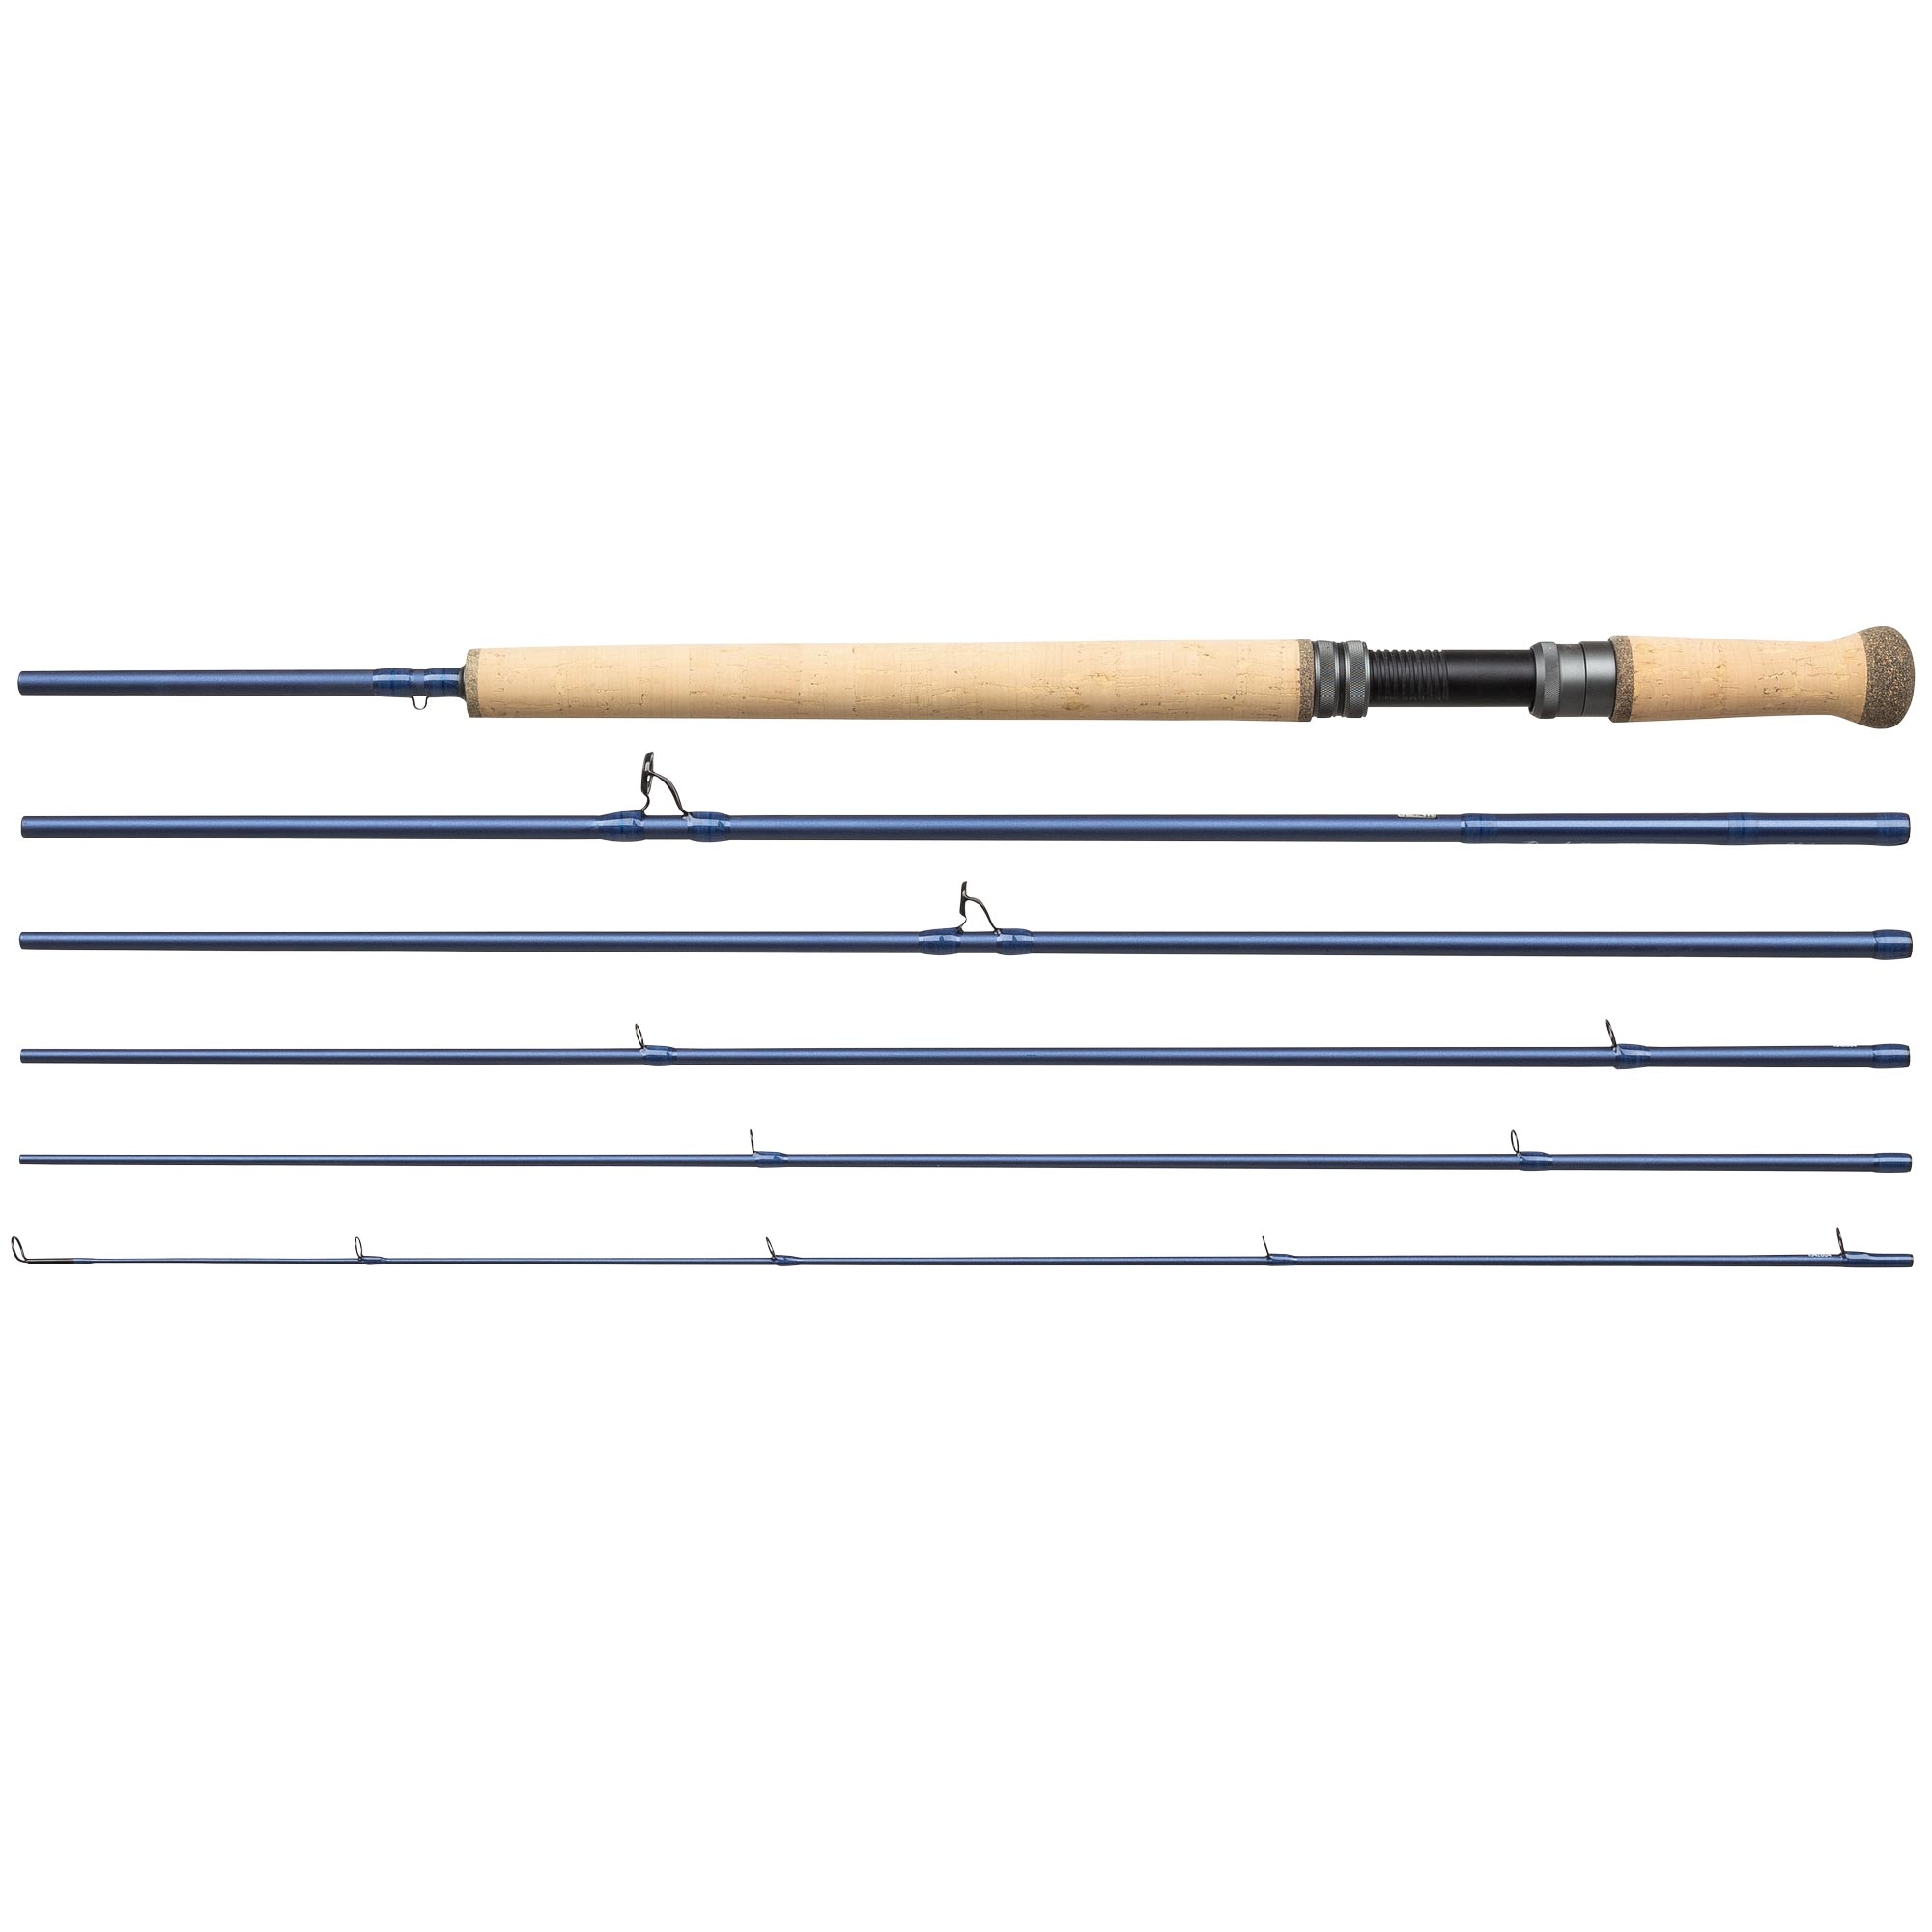 https://cdn.anglingactive.co.uk/media/catalog/product/cache/c7a5695839b539f20c8015776a05748c/s/h/shakespeare_oracle_2_exp_salmon_fly_rod_-_double_handed_travel_fly_fishing_rods.jpg